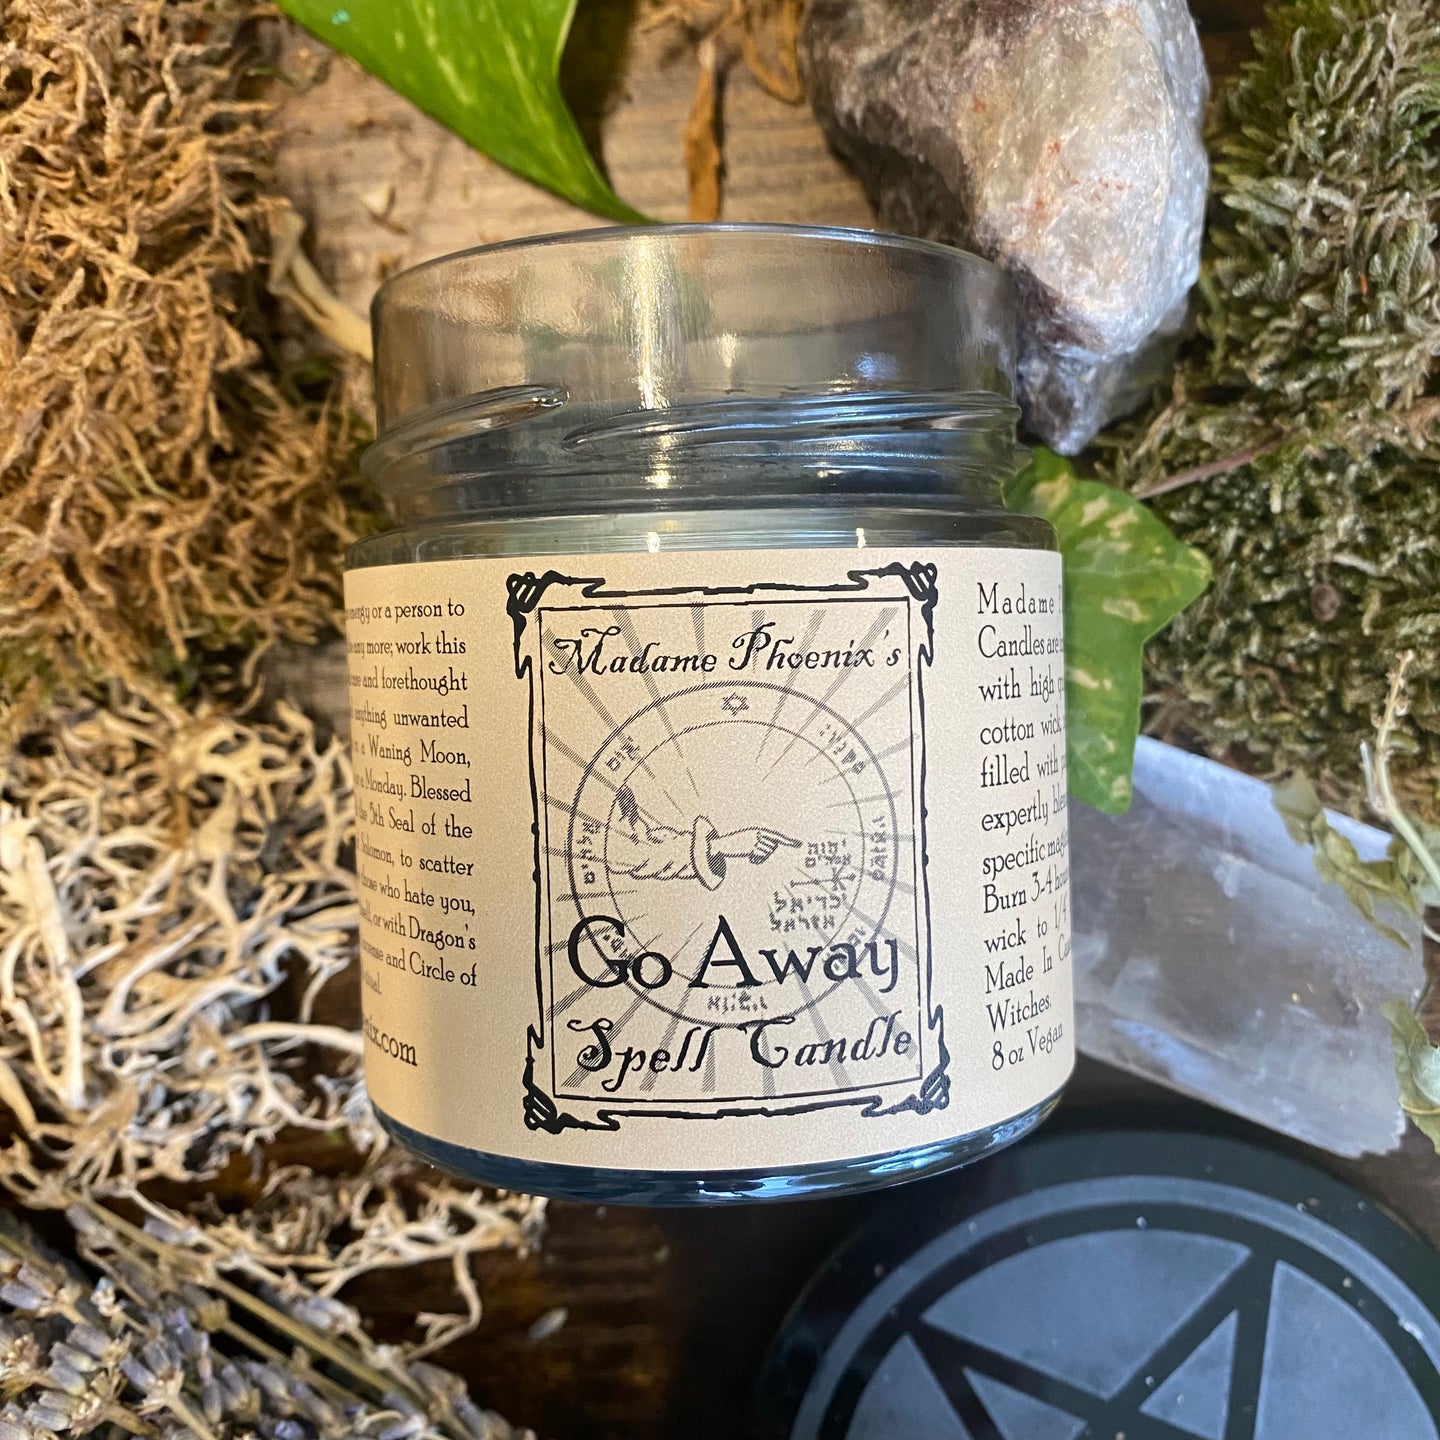 Go Away Spell Candle